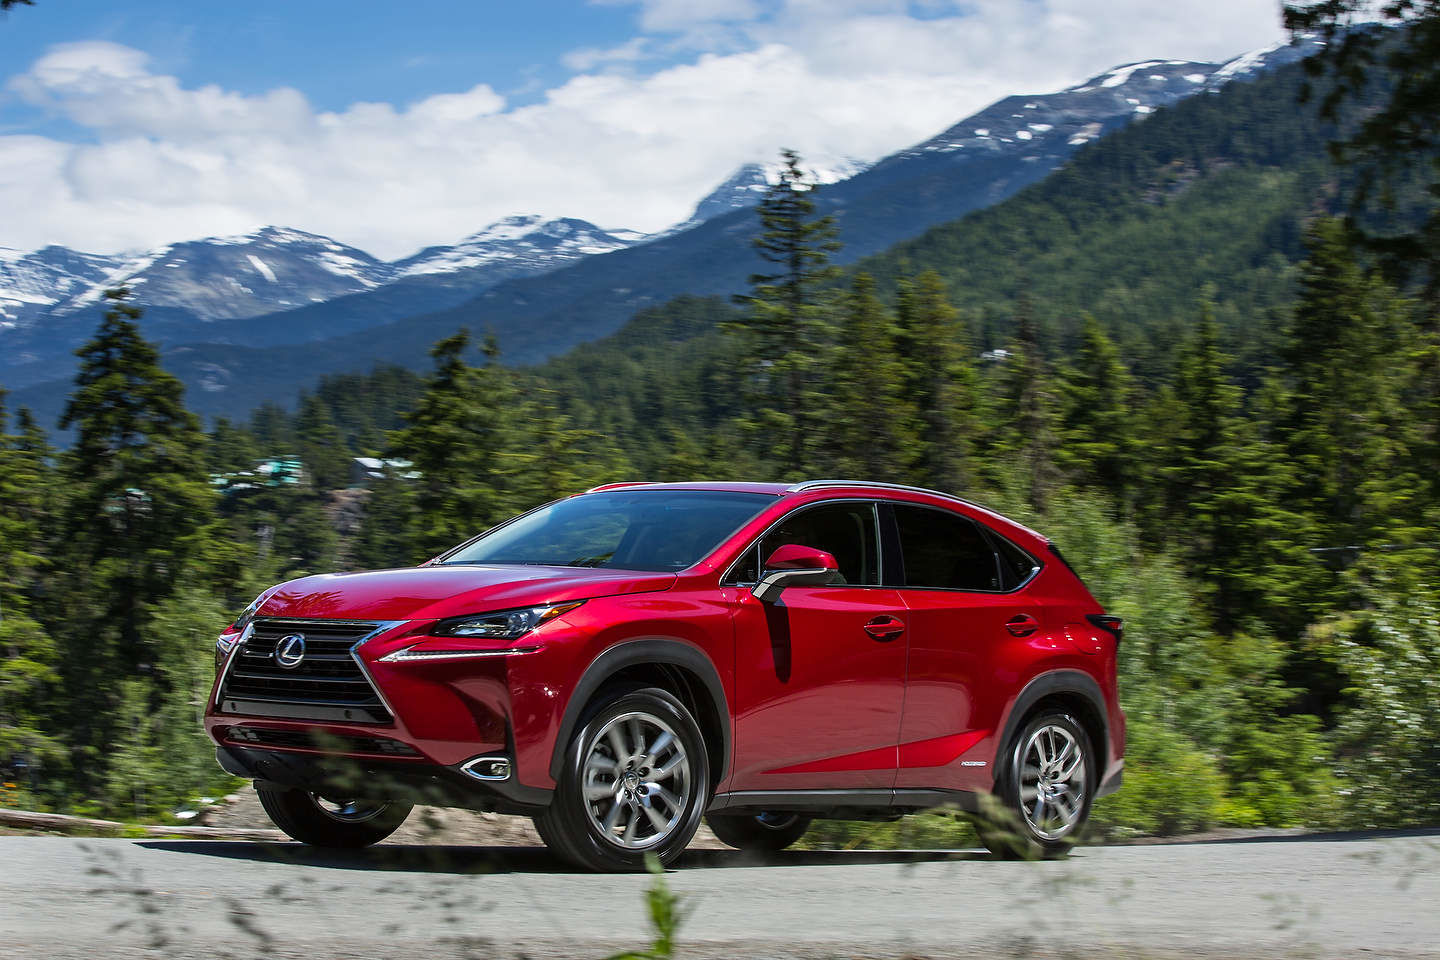 The advantages of the Lexus certified pre-owned vehicle program